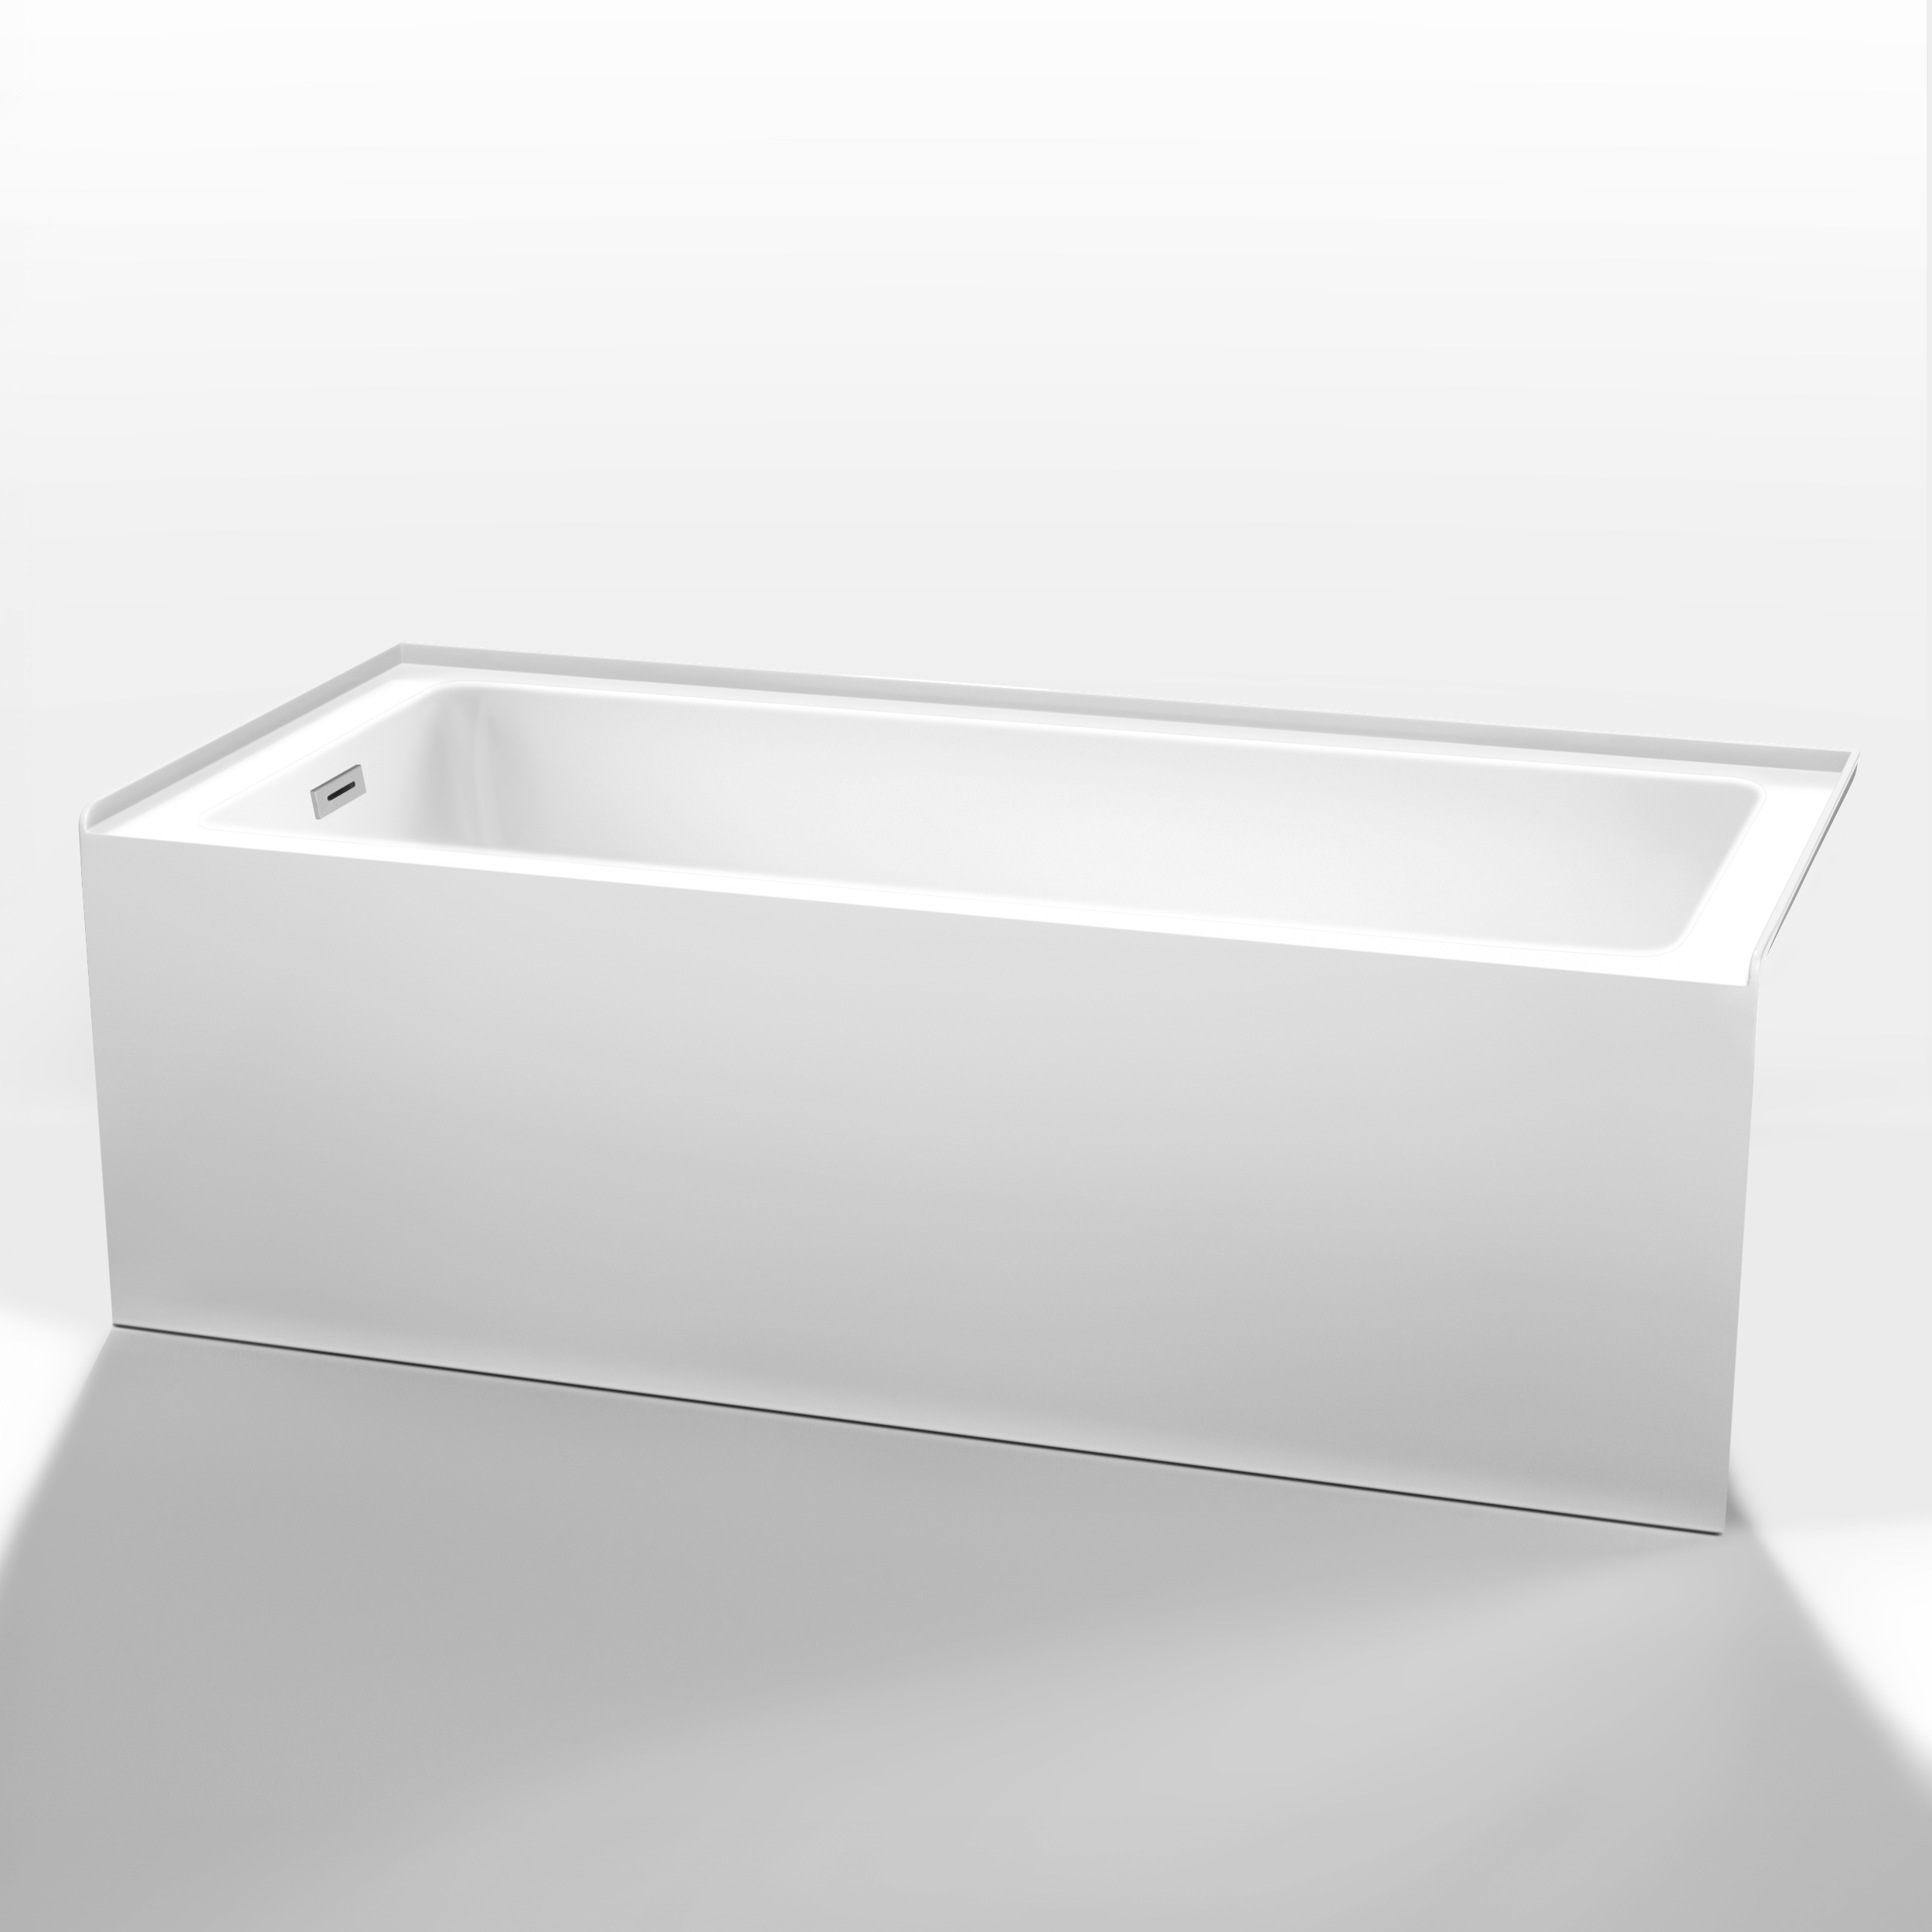 Grayley Alcove 66" Bathtub, Left Side Drain by Wyndham Collection - White WC-BTE-6632L